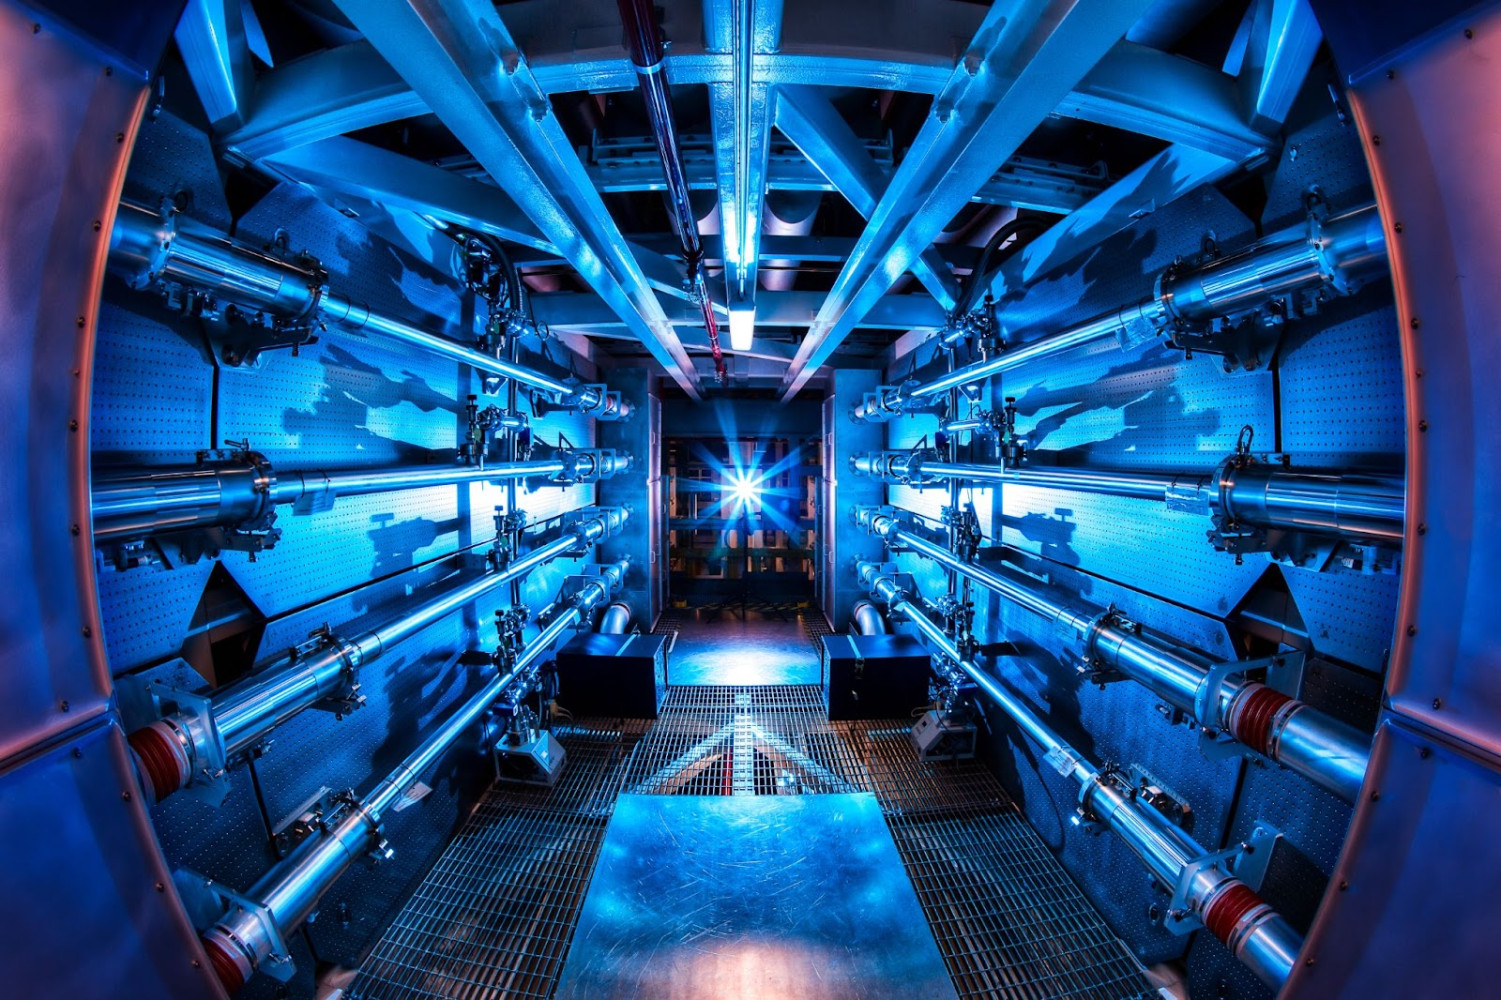 Nuclear fusion breakthrough might change our world but current renewable energy sources will save it, experts say